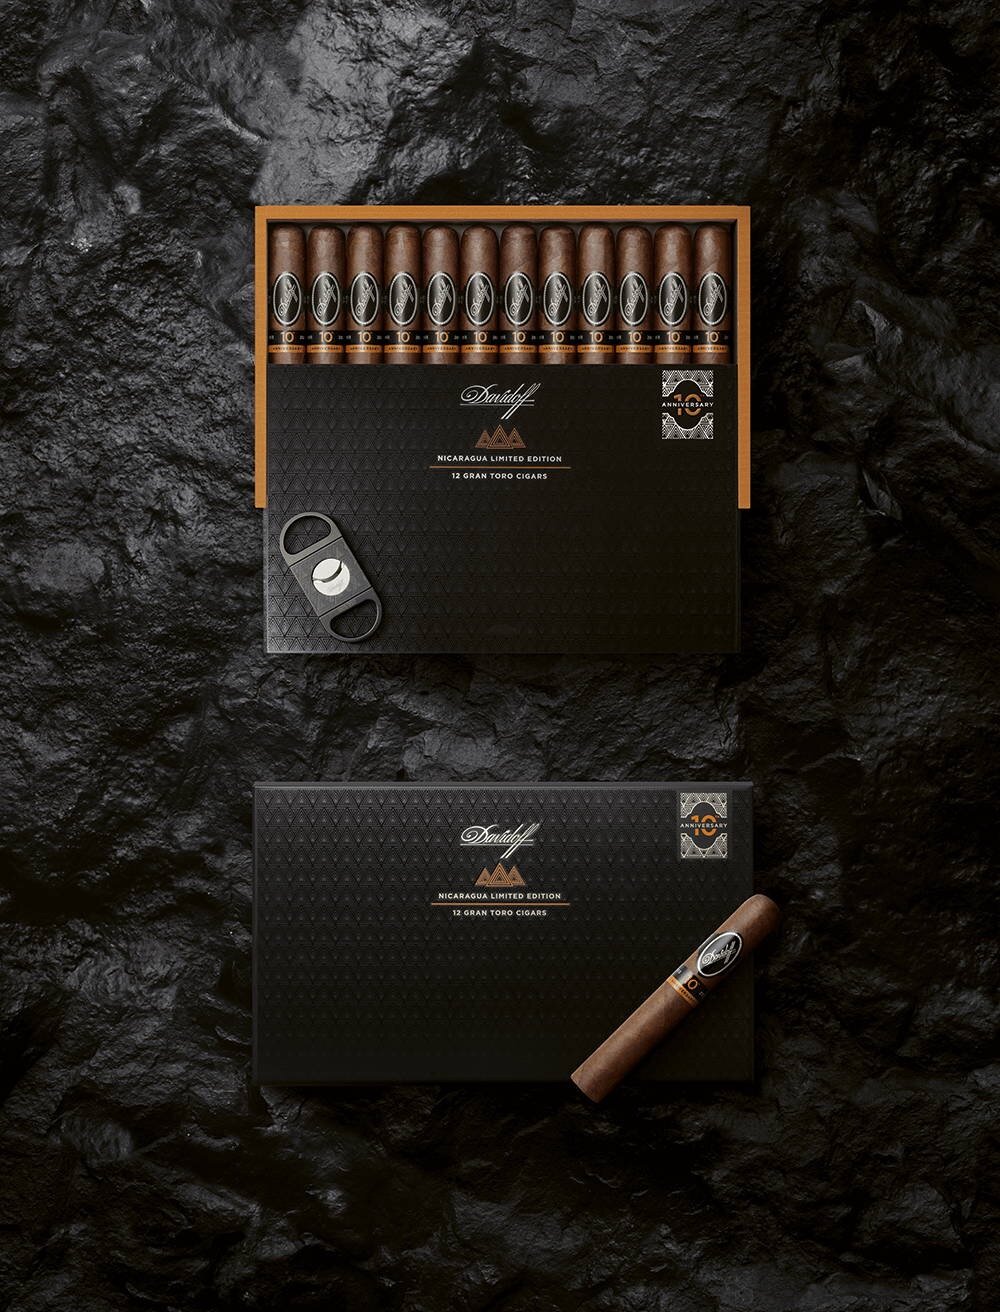 The Davidoff Nicaragua 10th Anniversary Limited Edition gran toro cigar in its opened box with the Davidoff Nicaragua Double Blade Cutter placed on top of it.